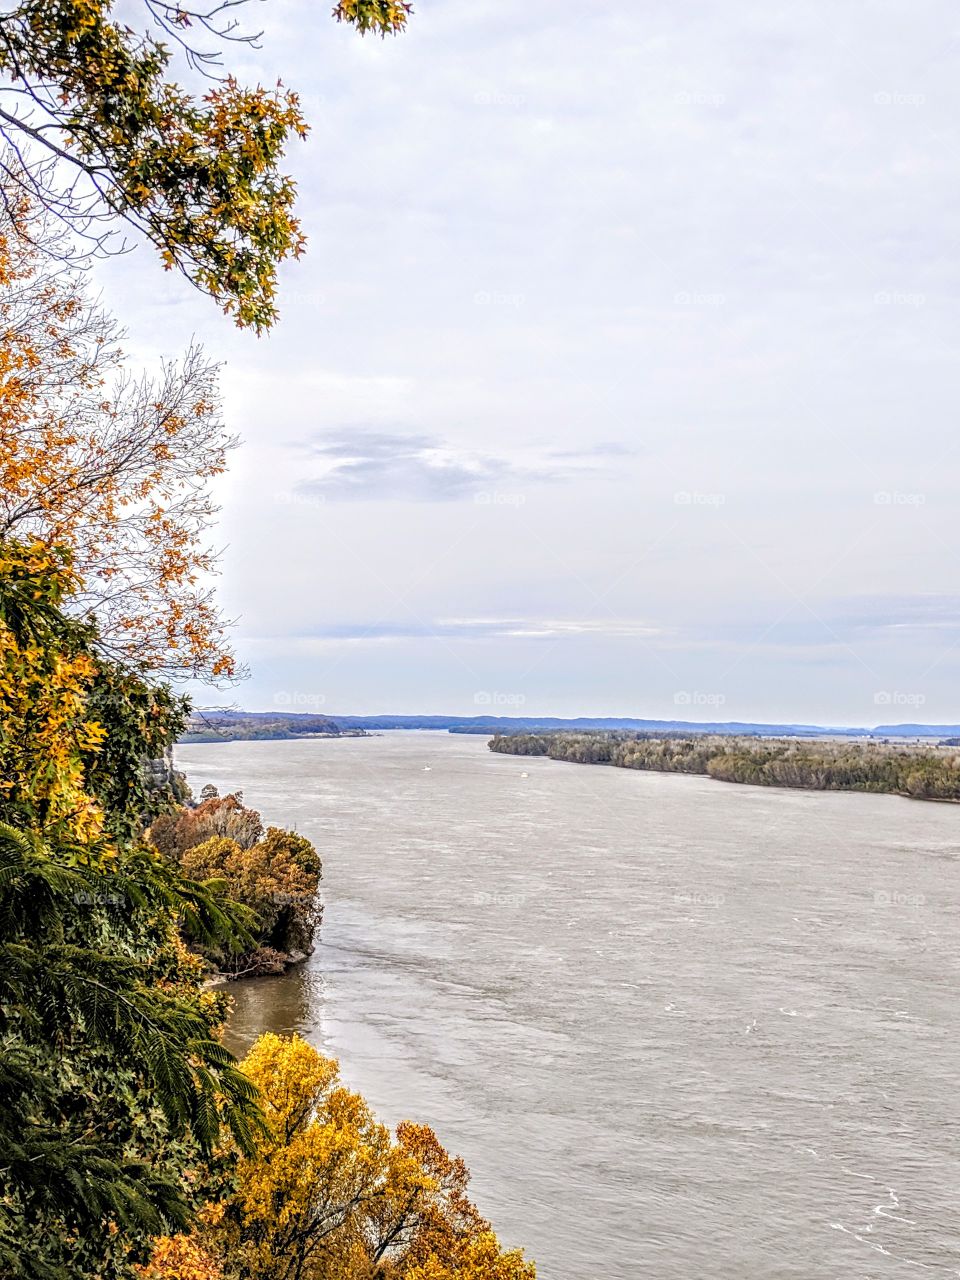 Scenic overview at Trail of Tears overlooking the Mississippi River